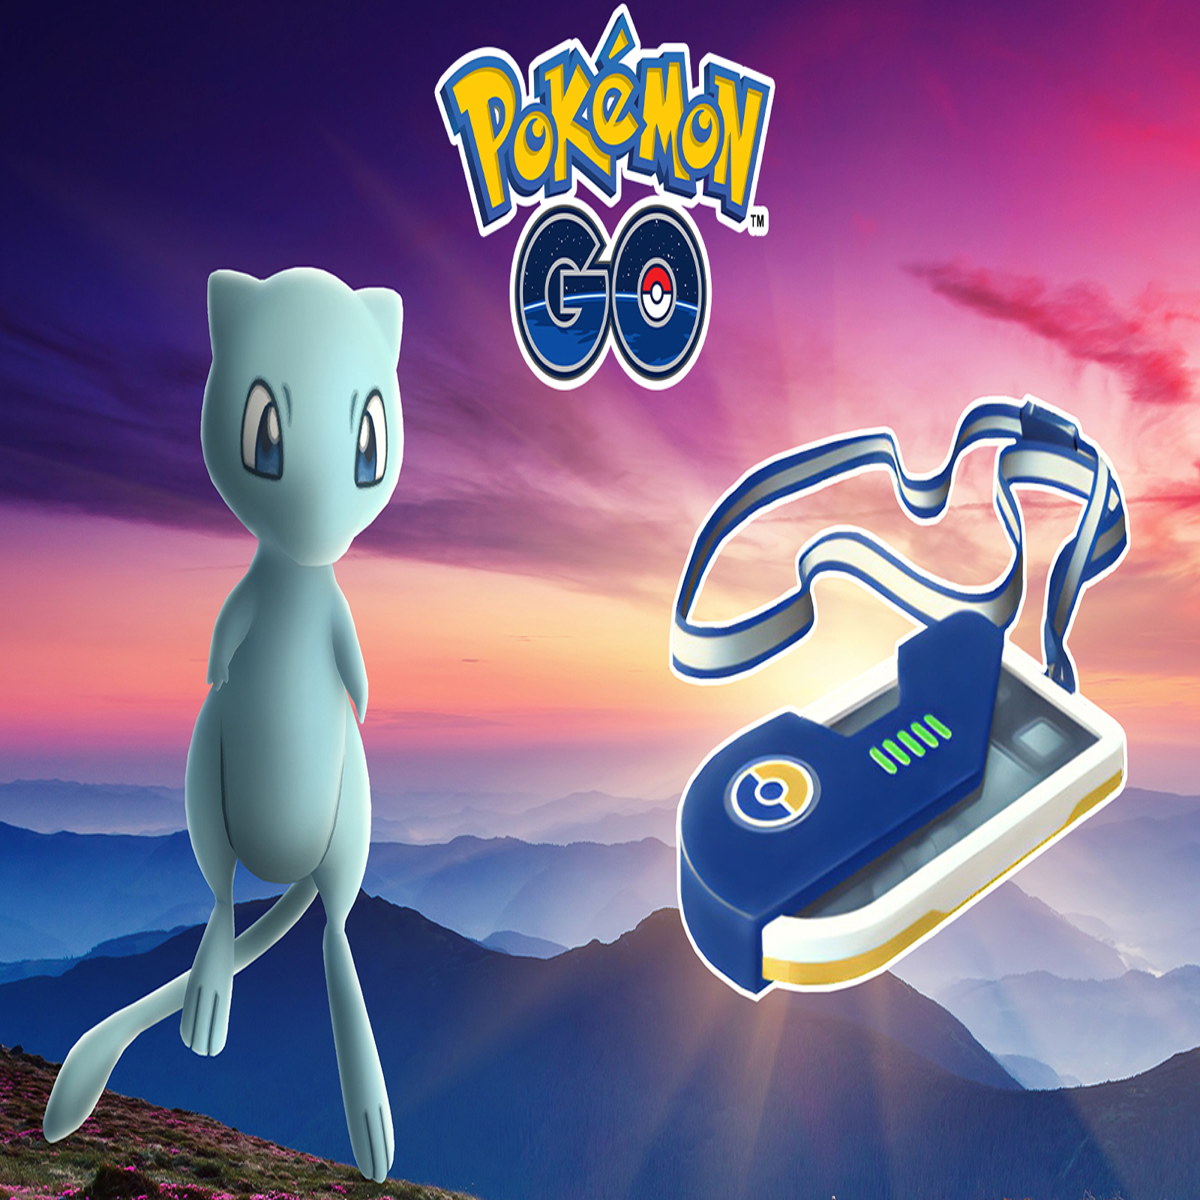 Pokemon GO: A Mythical Discovery Quest Guide